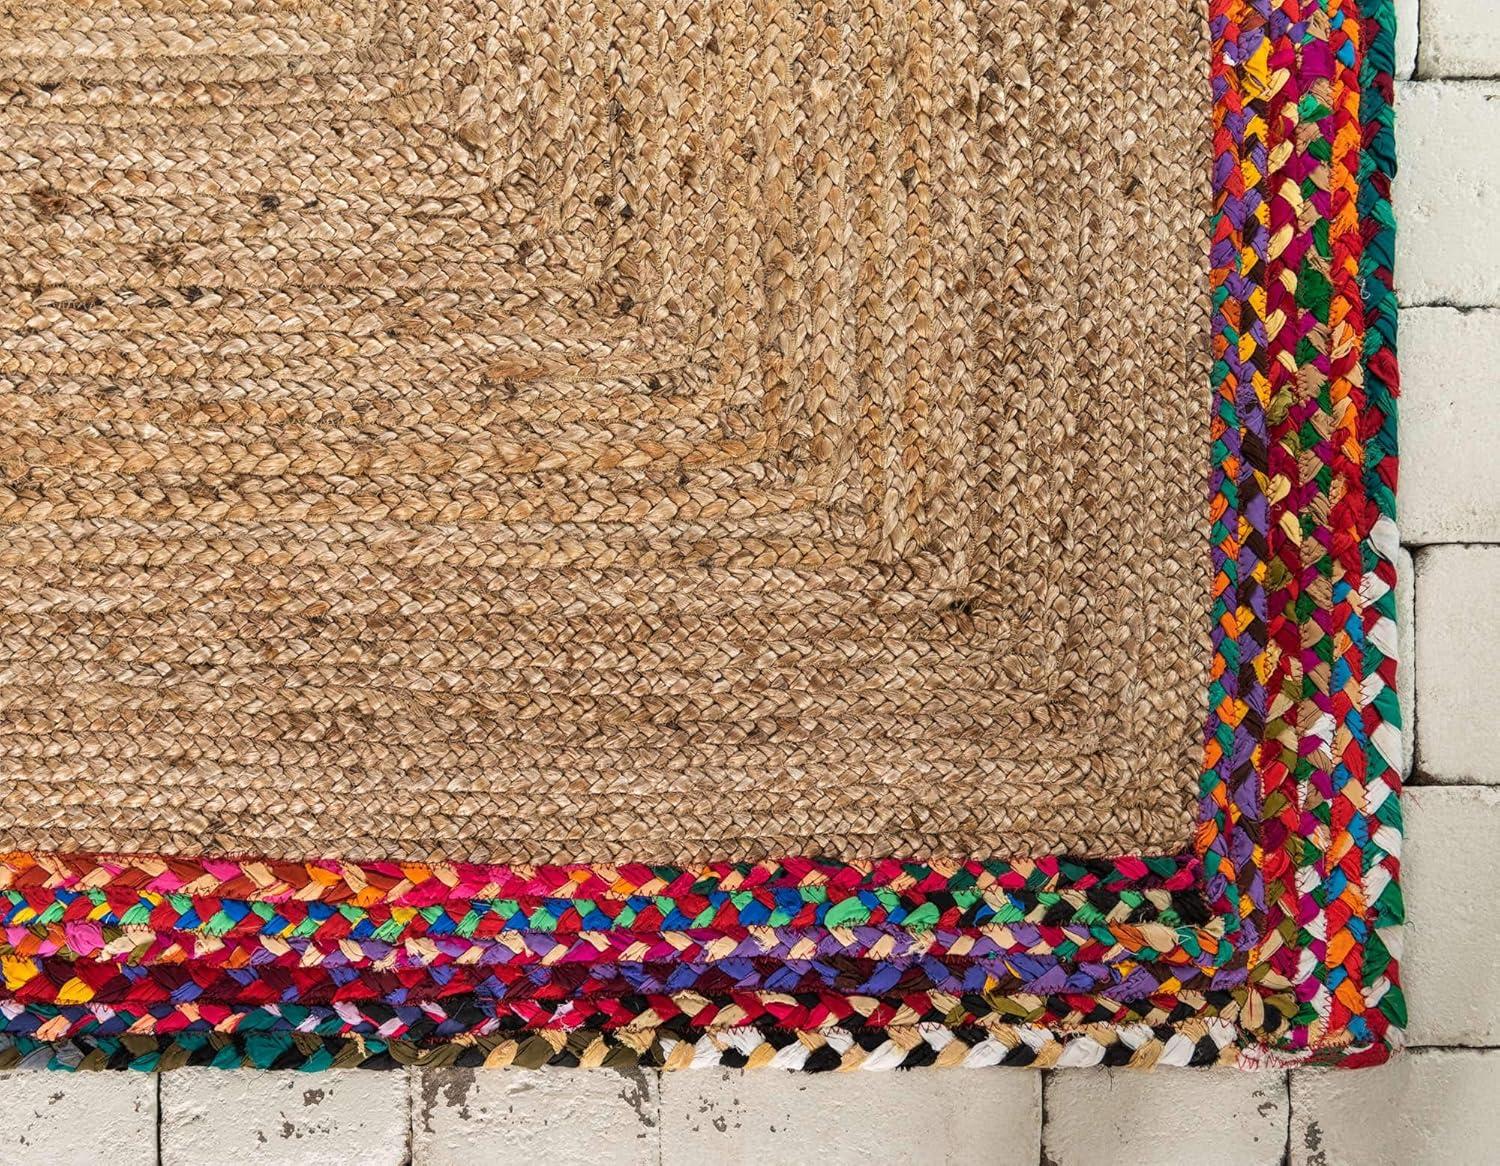 Hand-Braided Jute and Cotton Indoor Rug with Colorful Accents